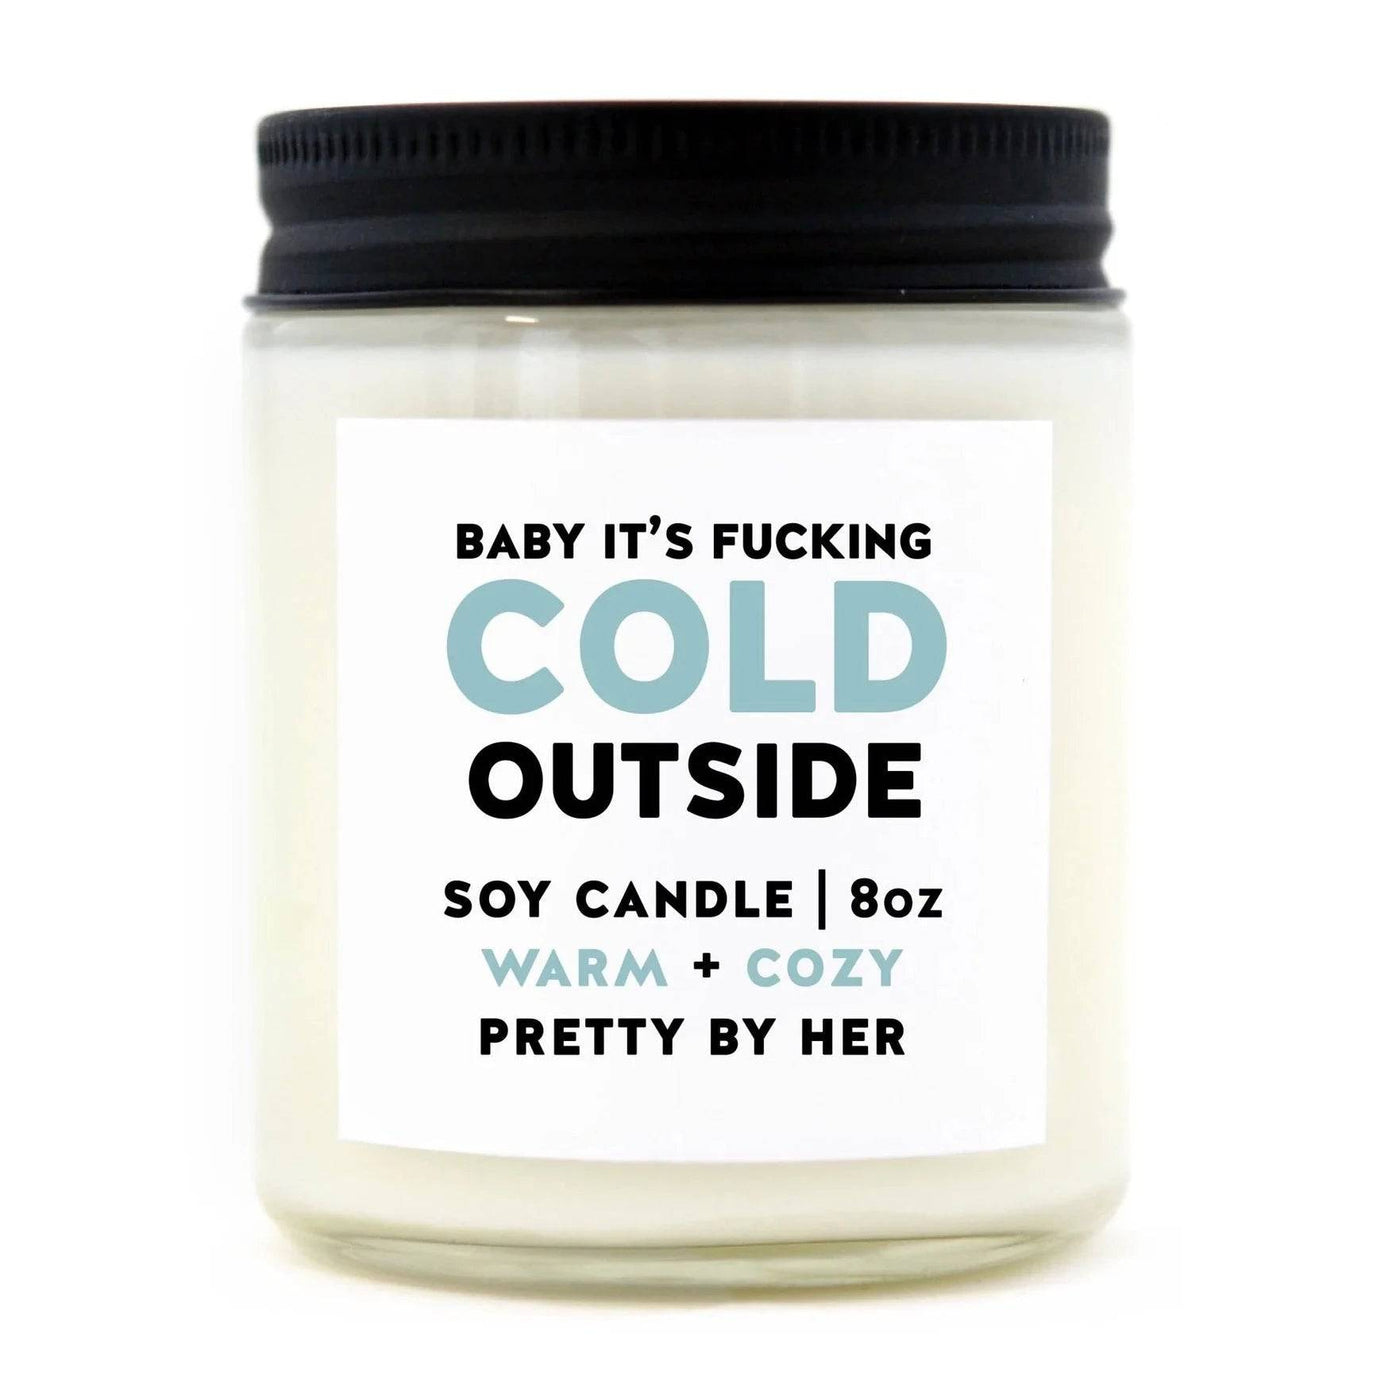 Baby It's Fucking Cold Outside | Candle (SALE) - The Local Space